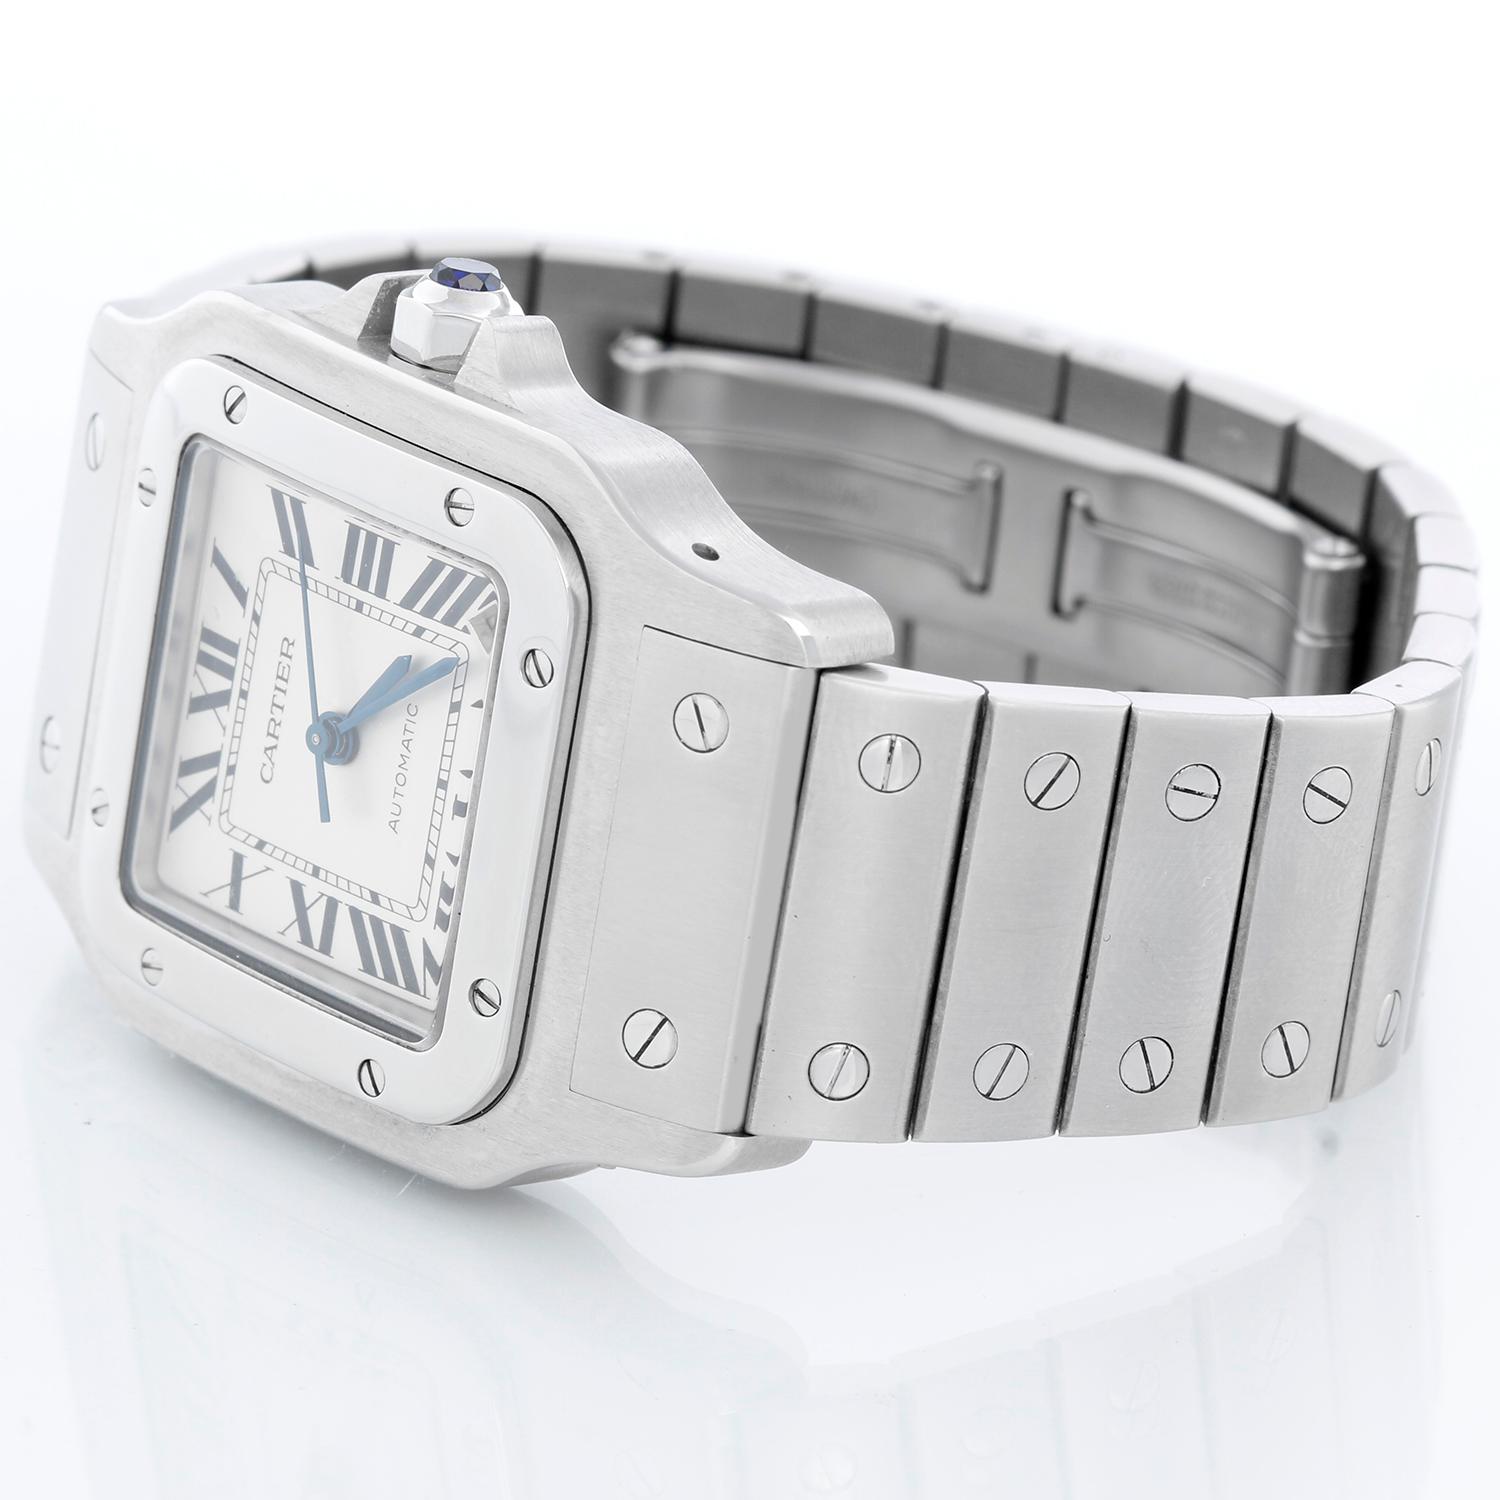 Cartier Santos Steel XL Automatic Men's Watch W20098D6 2823 - Automatic winding. Stainless steel case (34mm x 45mm). Silver dial with black Roman numerals and date at 5 o'clock. Stainless steel Cartier deployant style bracelet; fits a 7 inch wrist